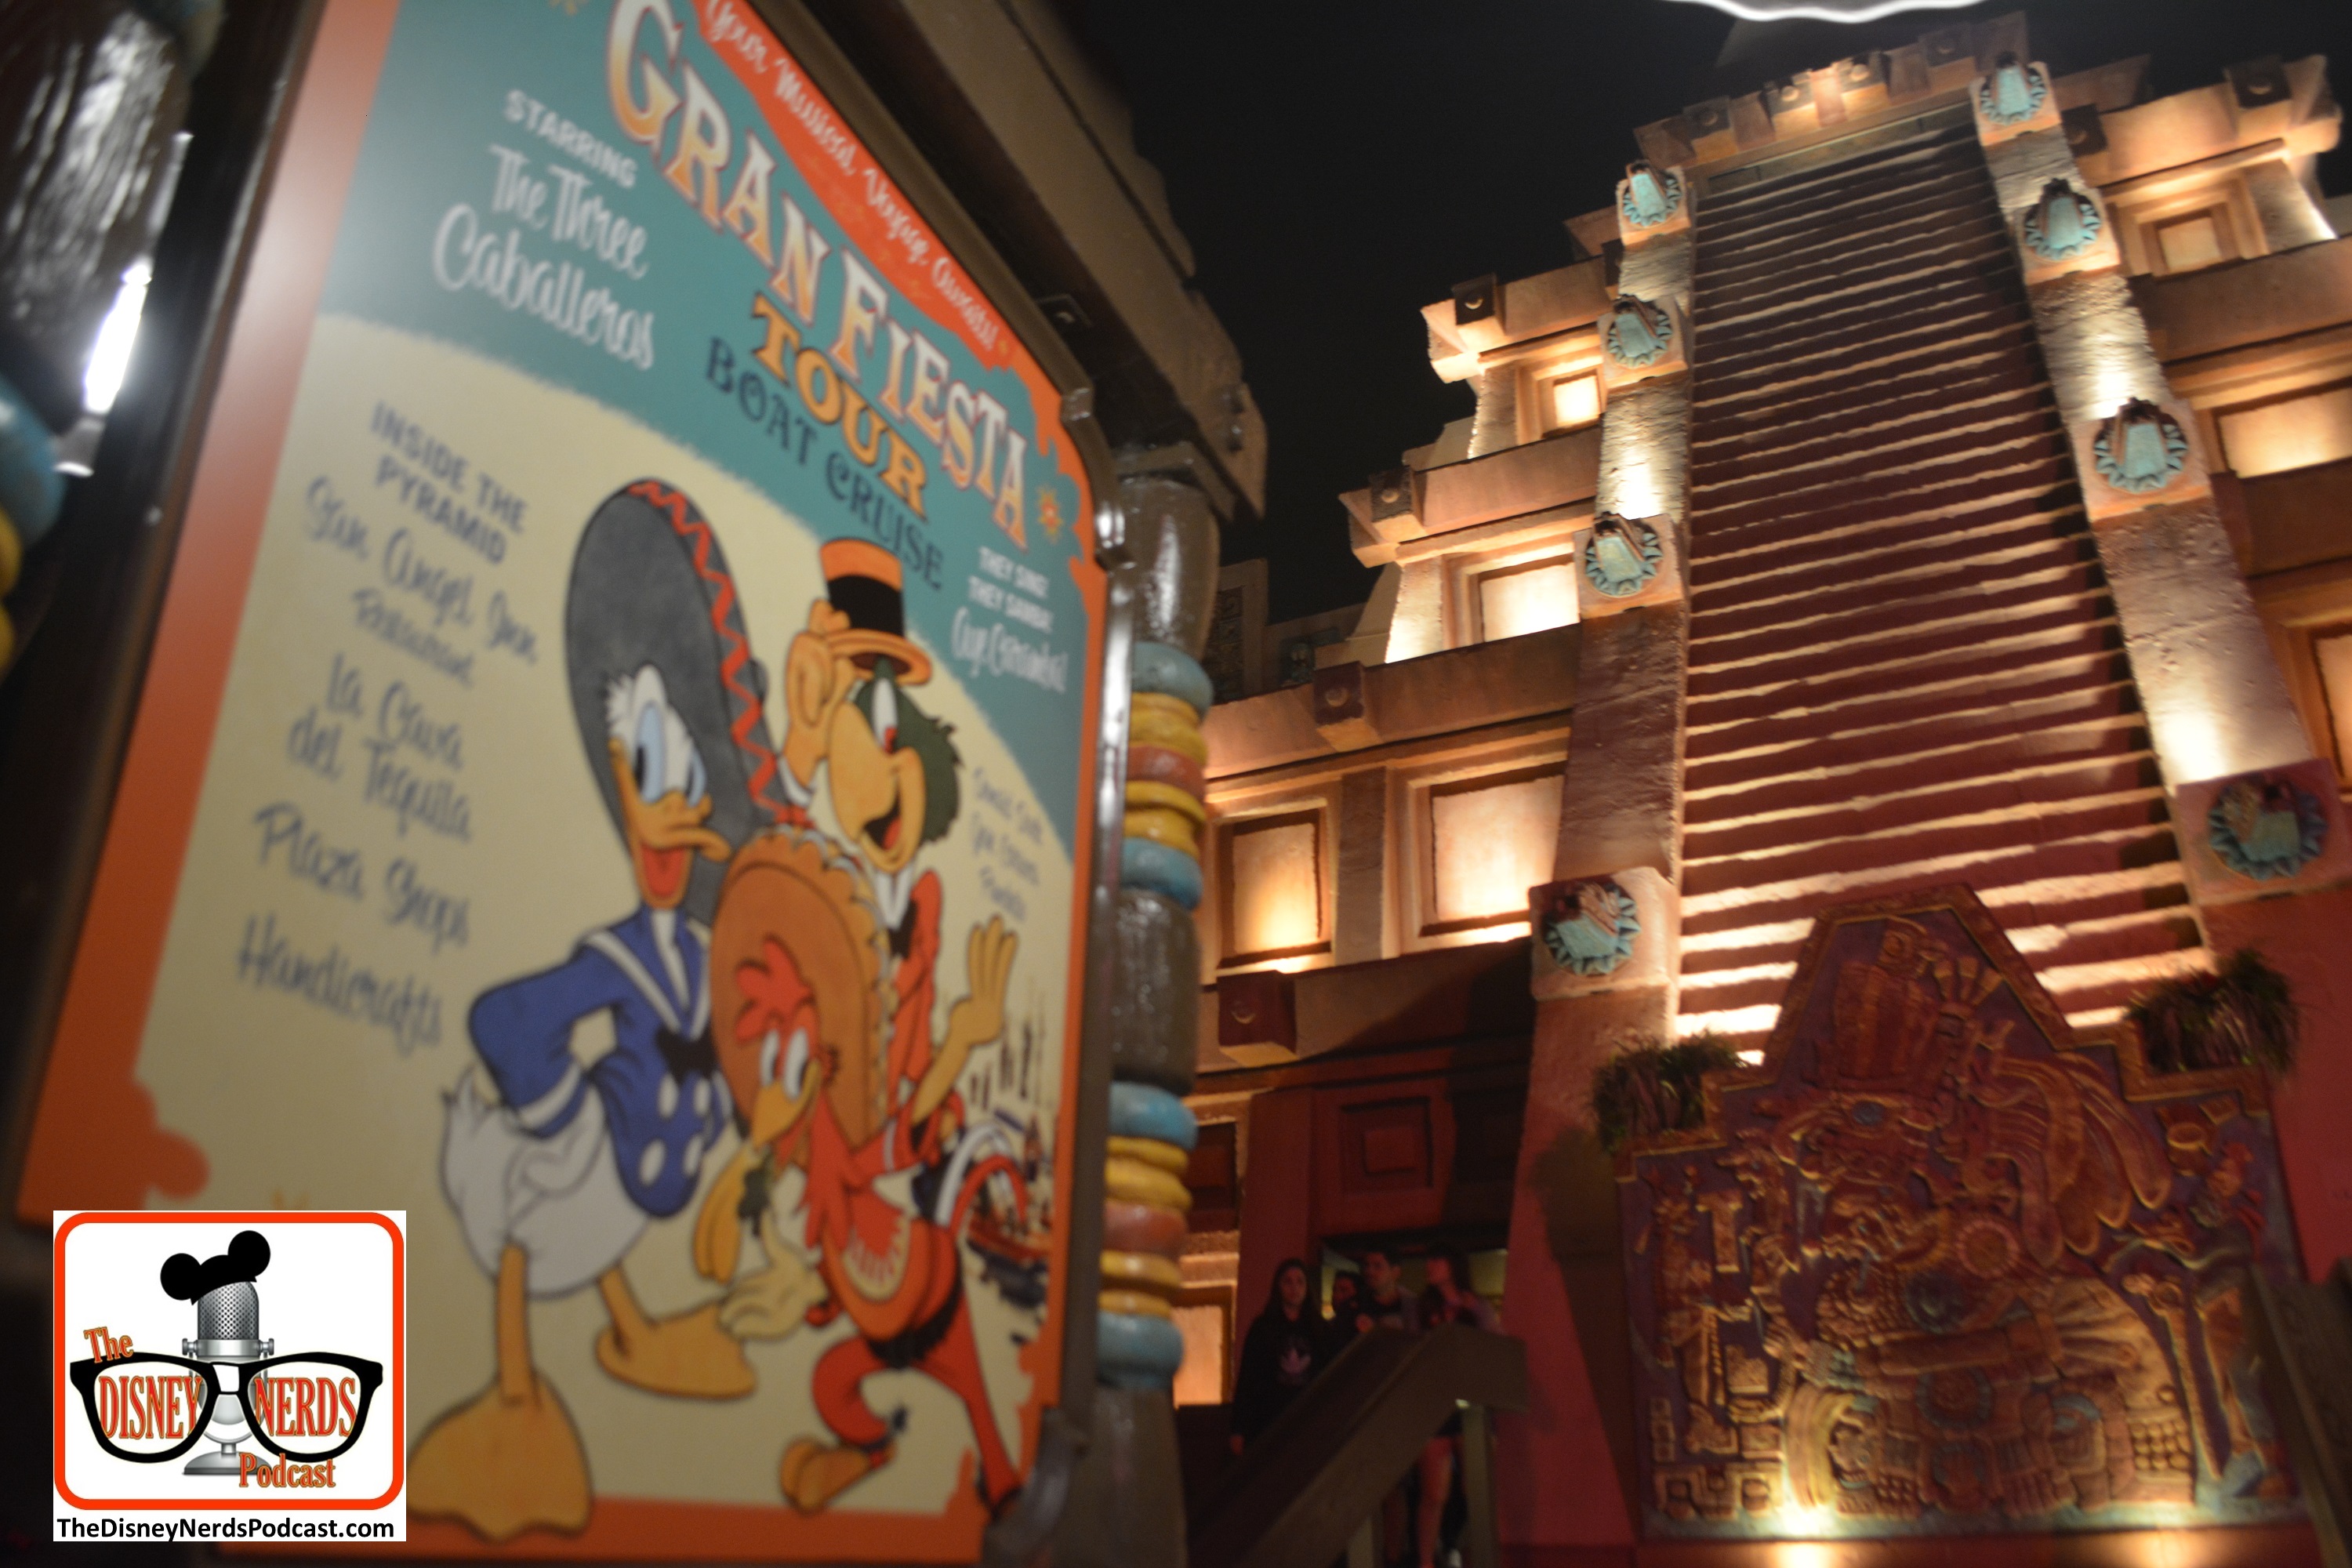 2015-12 - Epcot - Back in Mexico the new Grand Fiesta Tour Sign debuted, along with new autoanimatronics